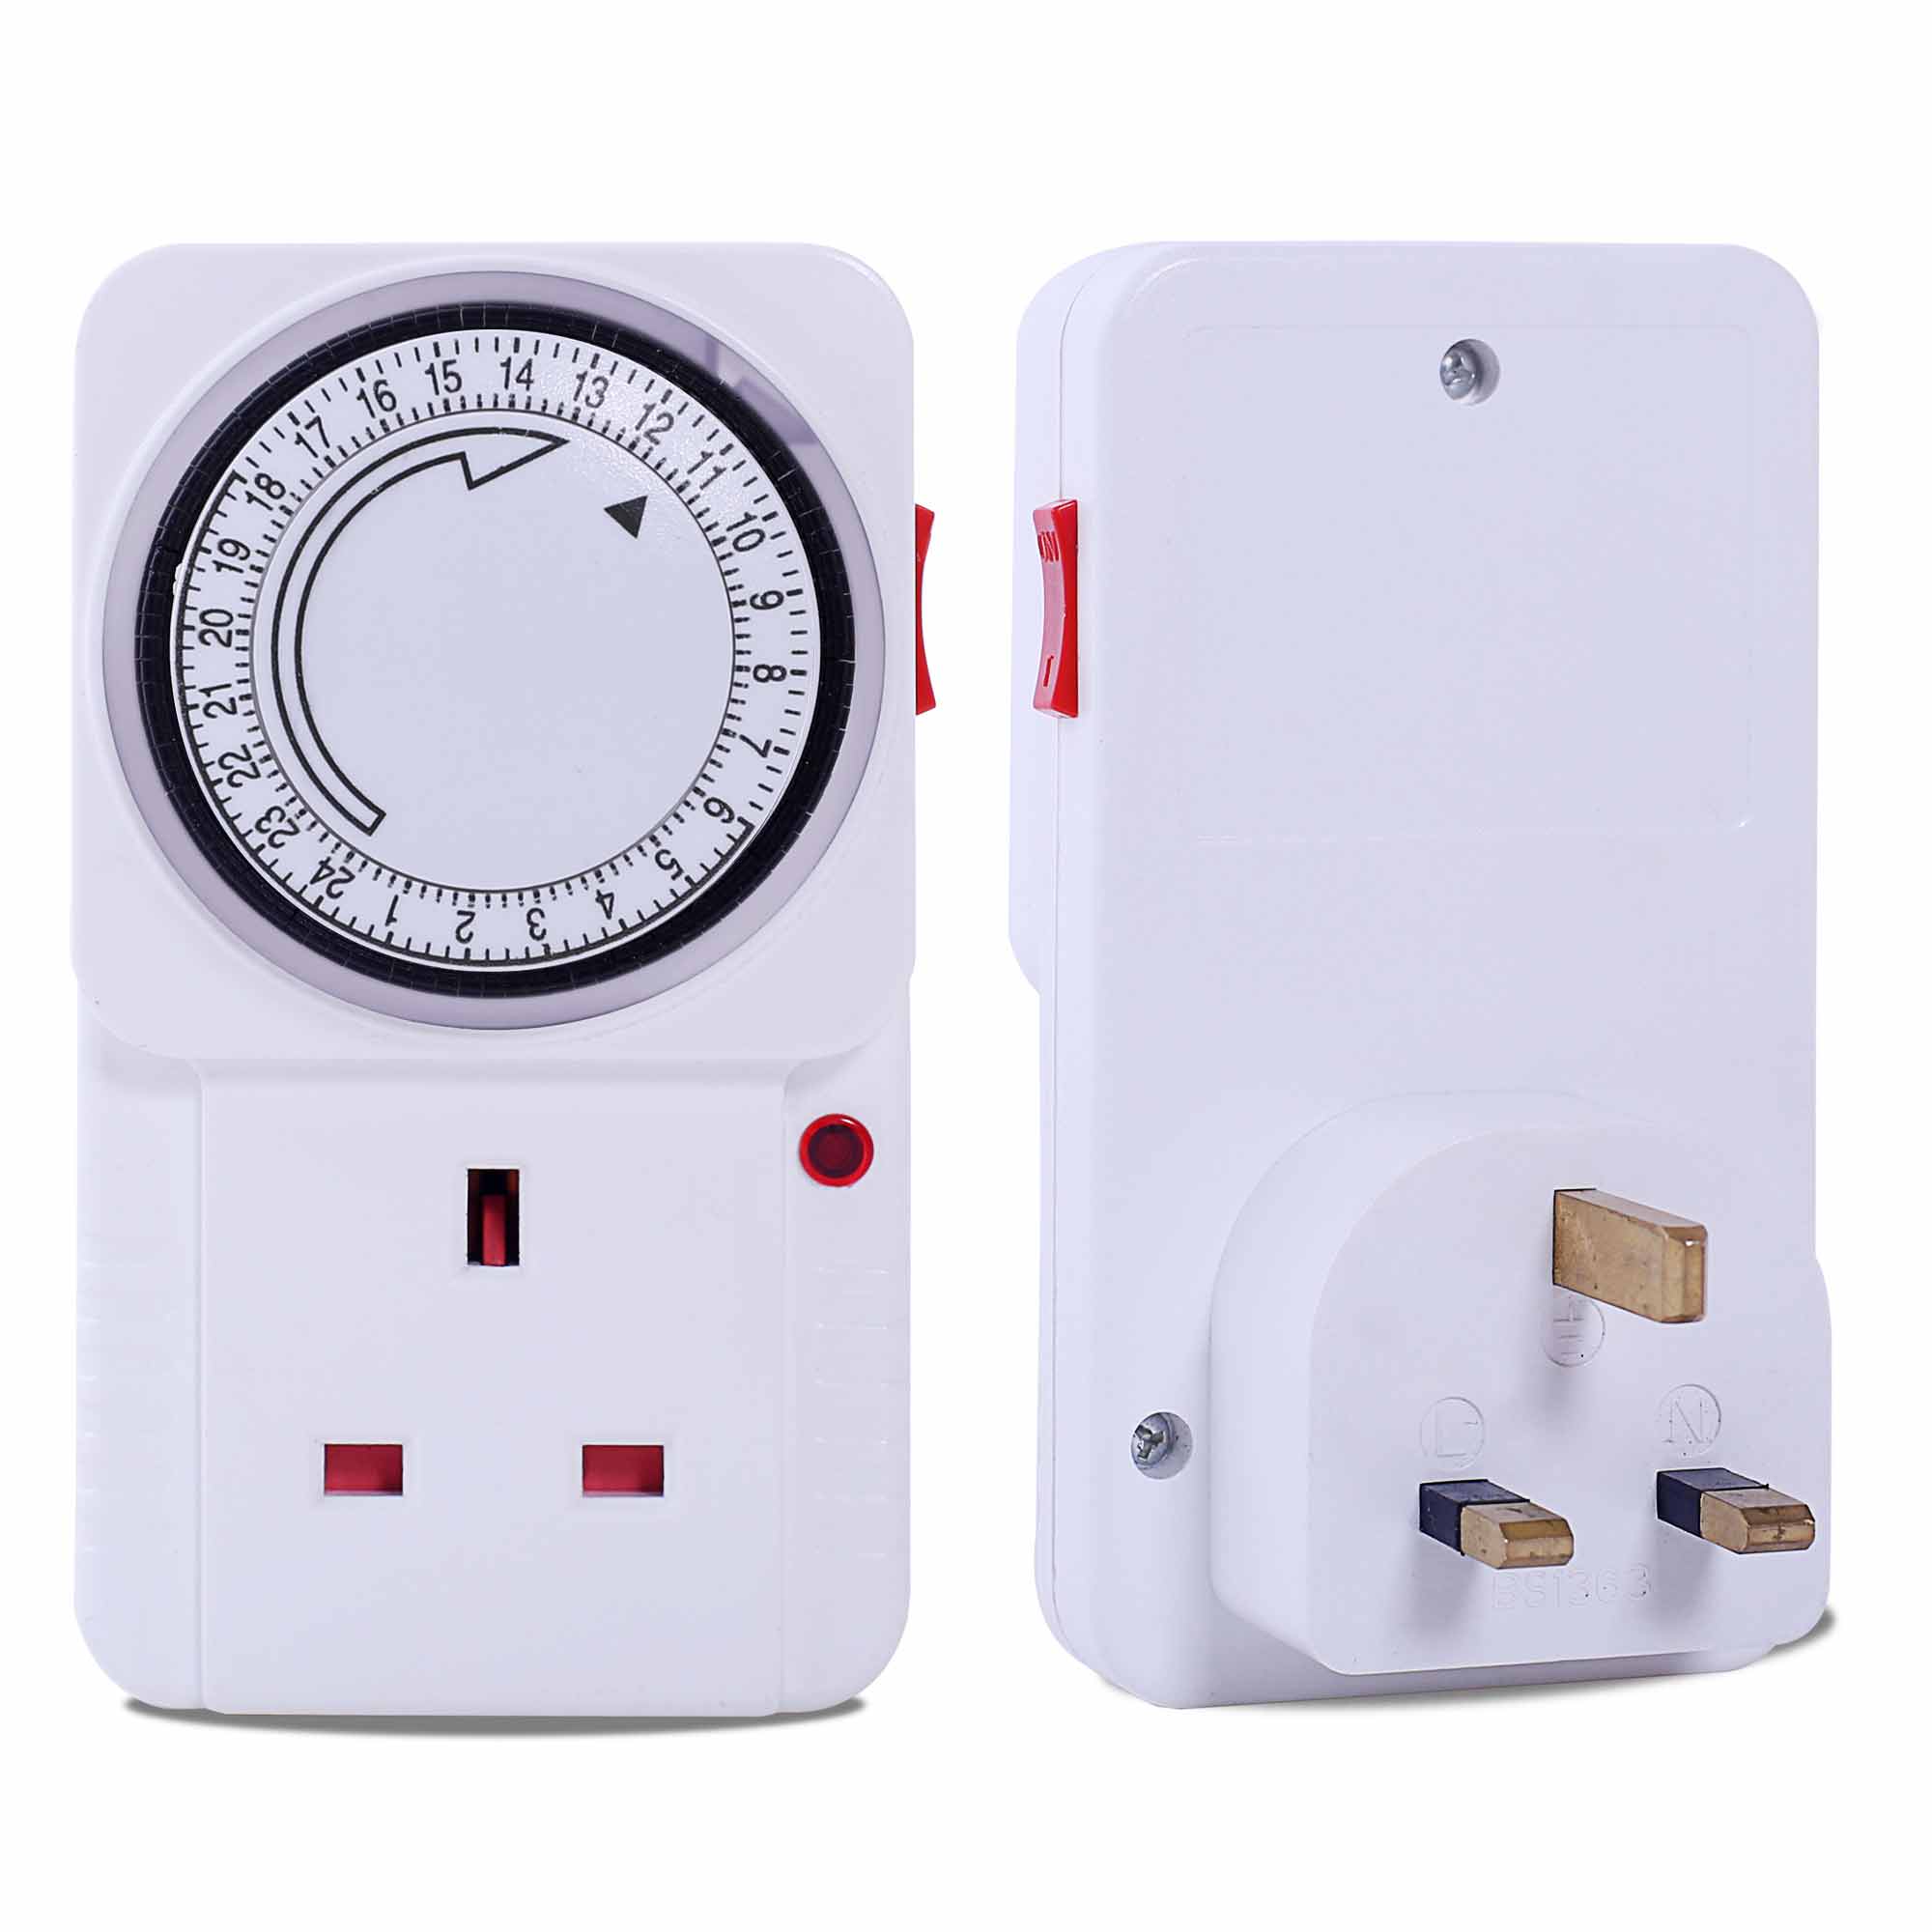 HBN 24 Hour Plug-In Energy Saving Programmable Mechanical Timer Switch, BND-50/E39